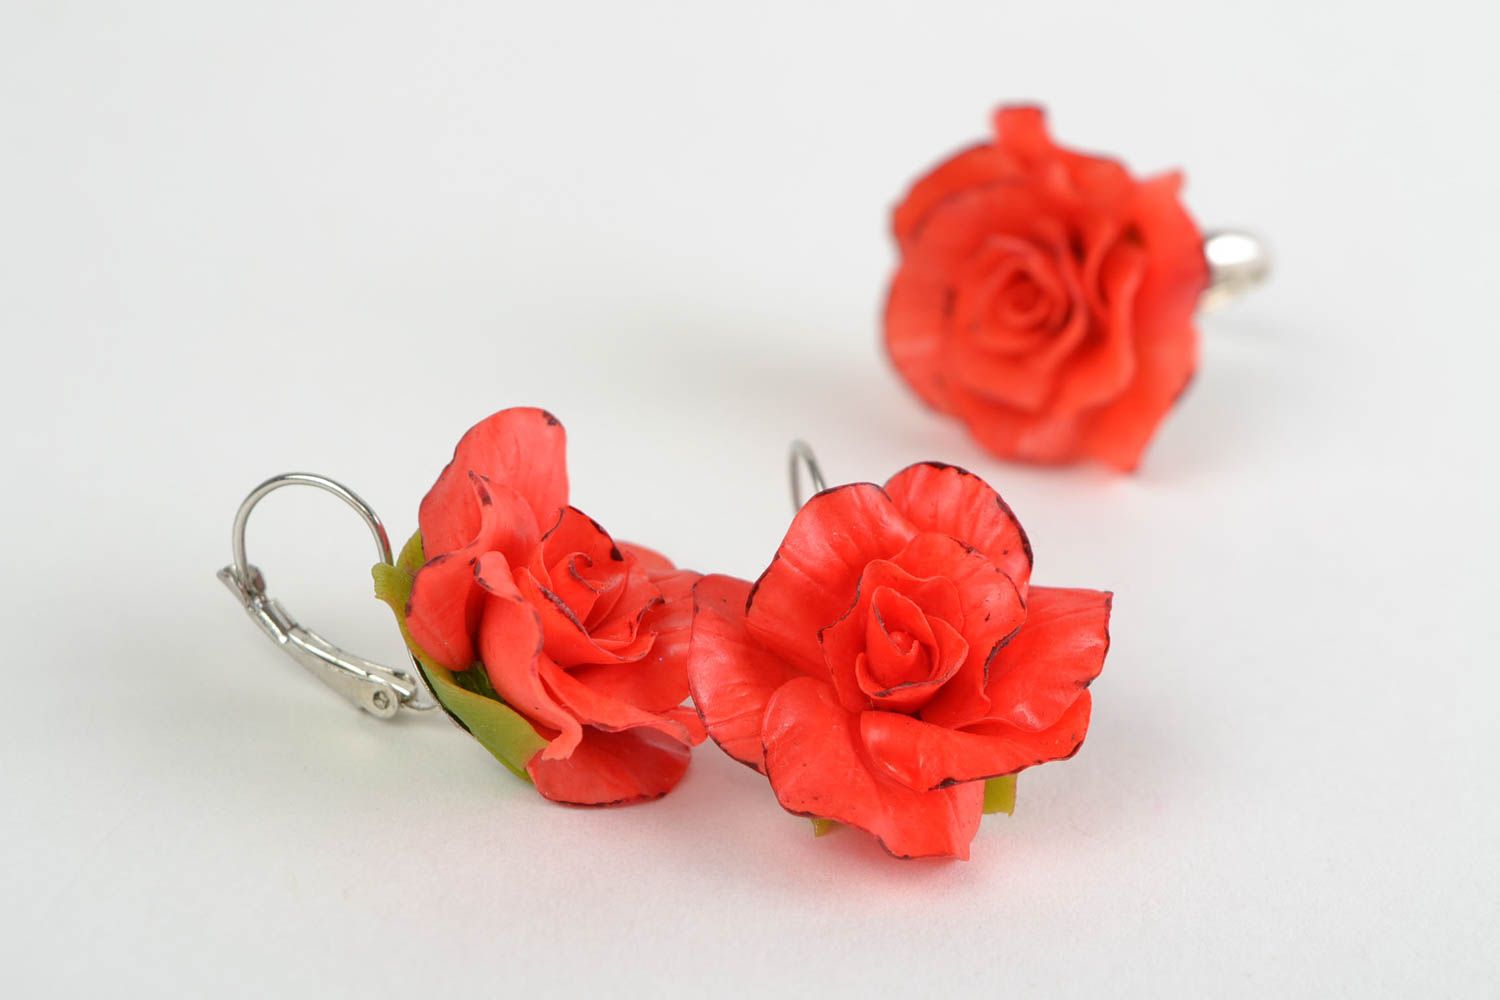 Handmade cold porcelain designer jewelry set 2 pieces flower earrings and ring photo 4